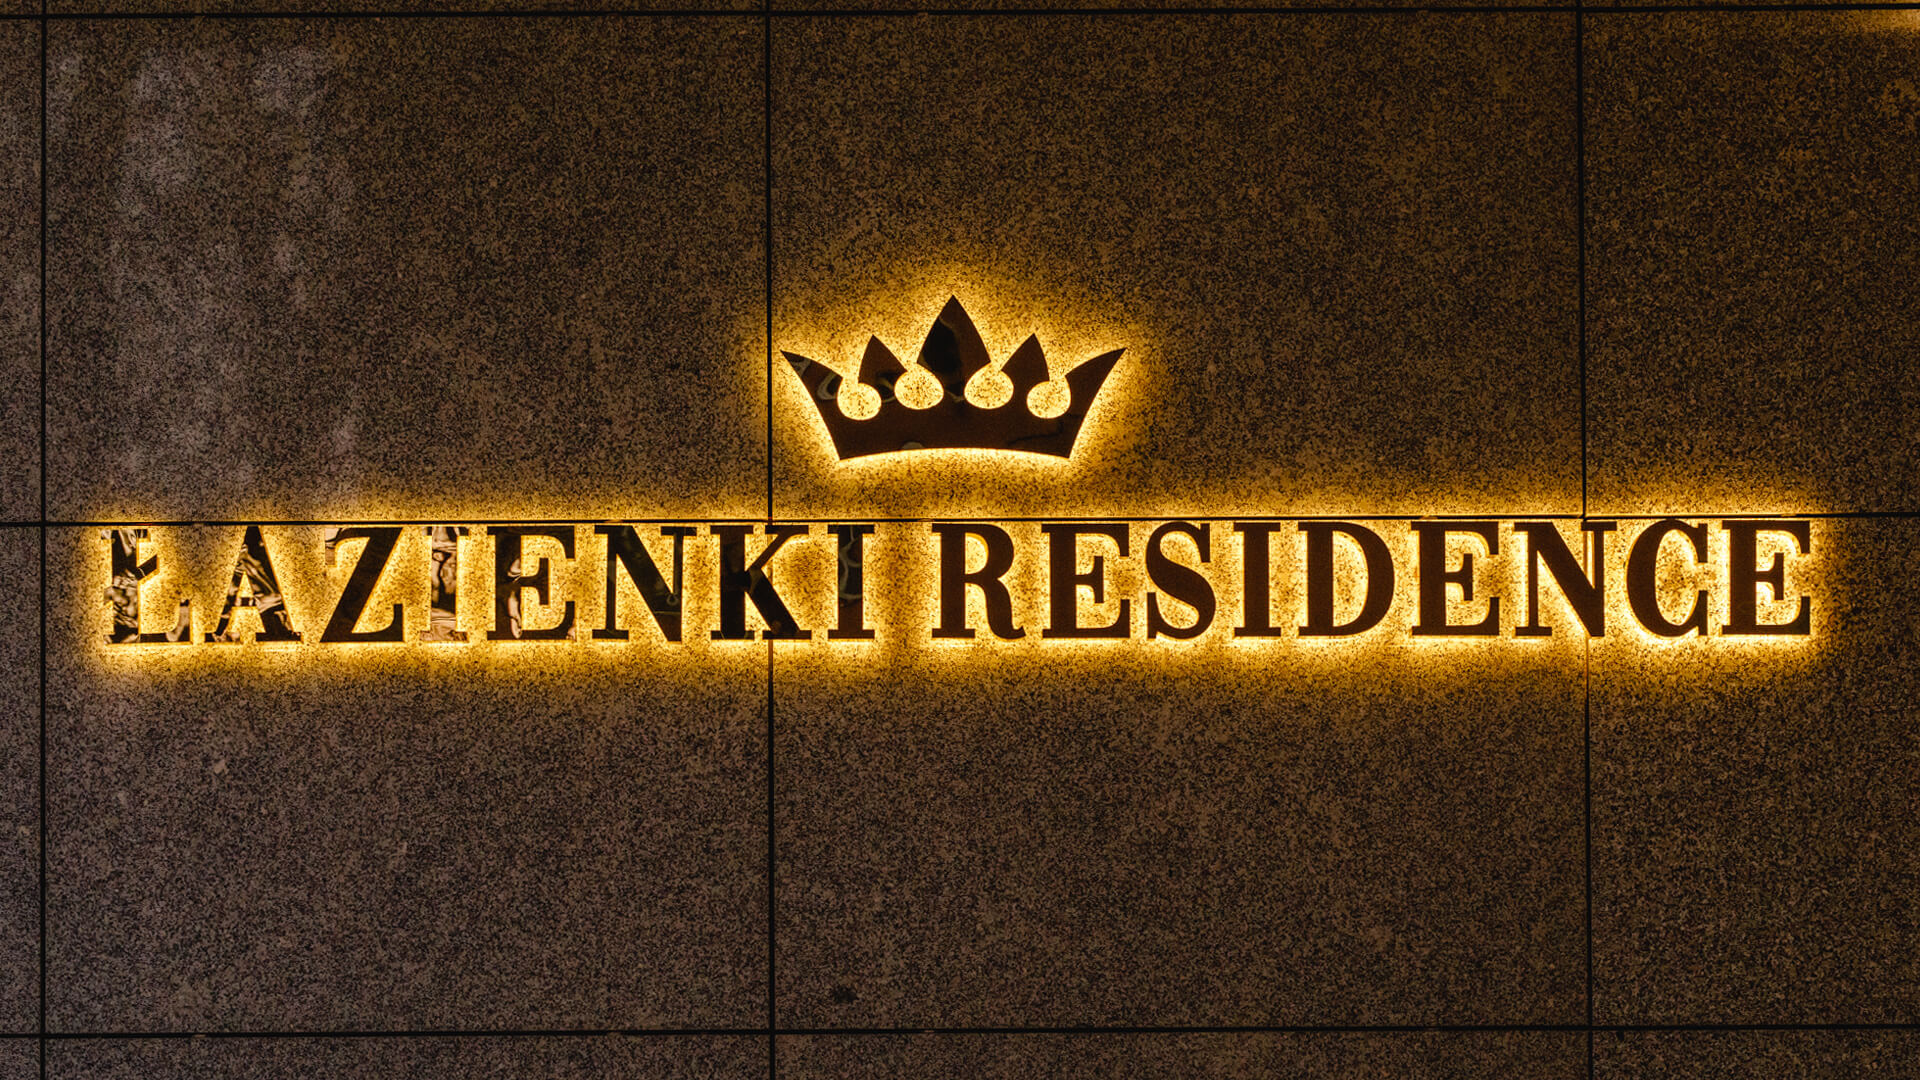 Baths Residence - Bathroom Residence lettering made of stainless steel in gold, back-lit LED on the wall, with a crown in the logo.